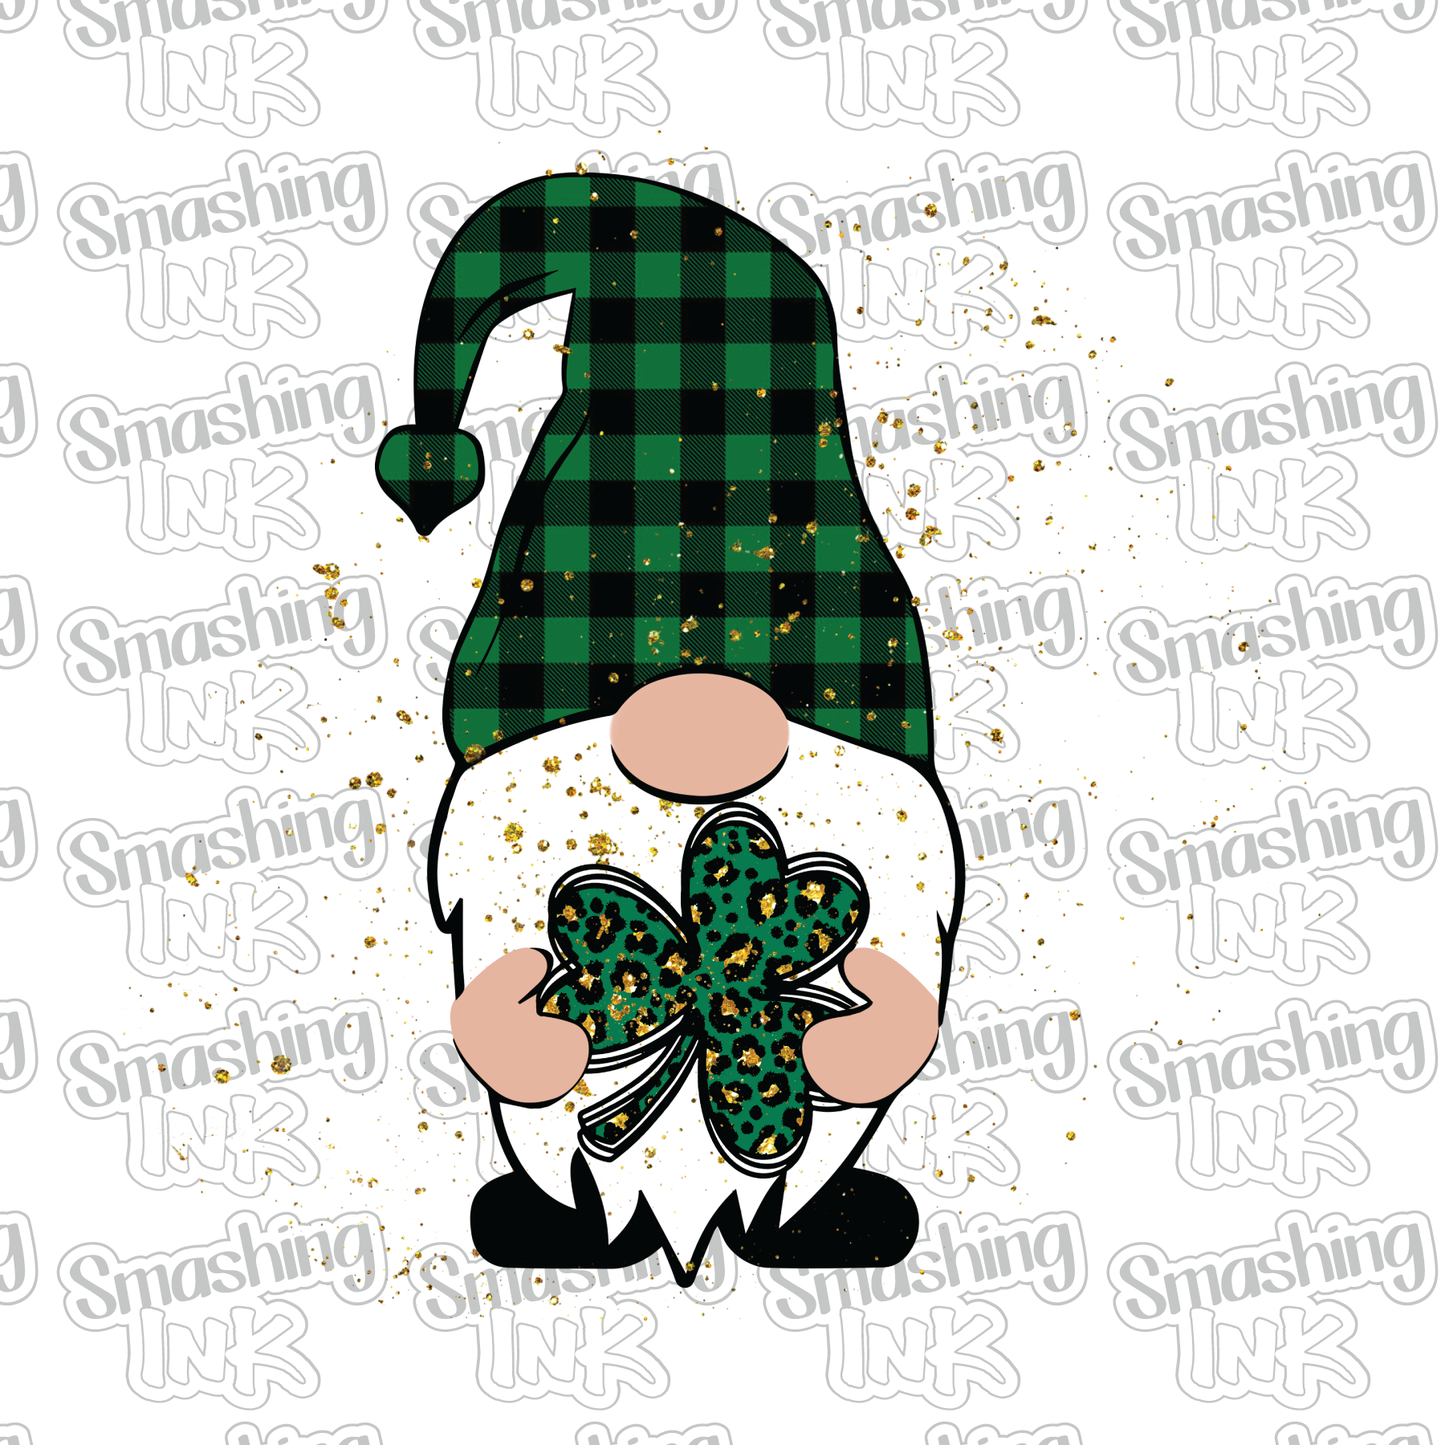 St. Patrick's day Earrings sublimation design with glitter